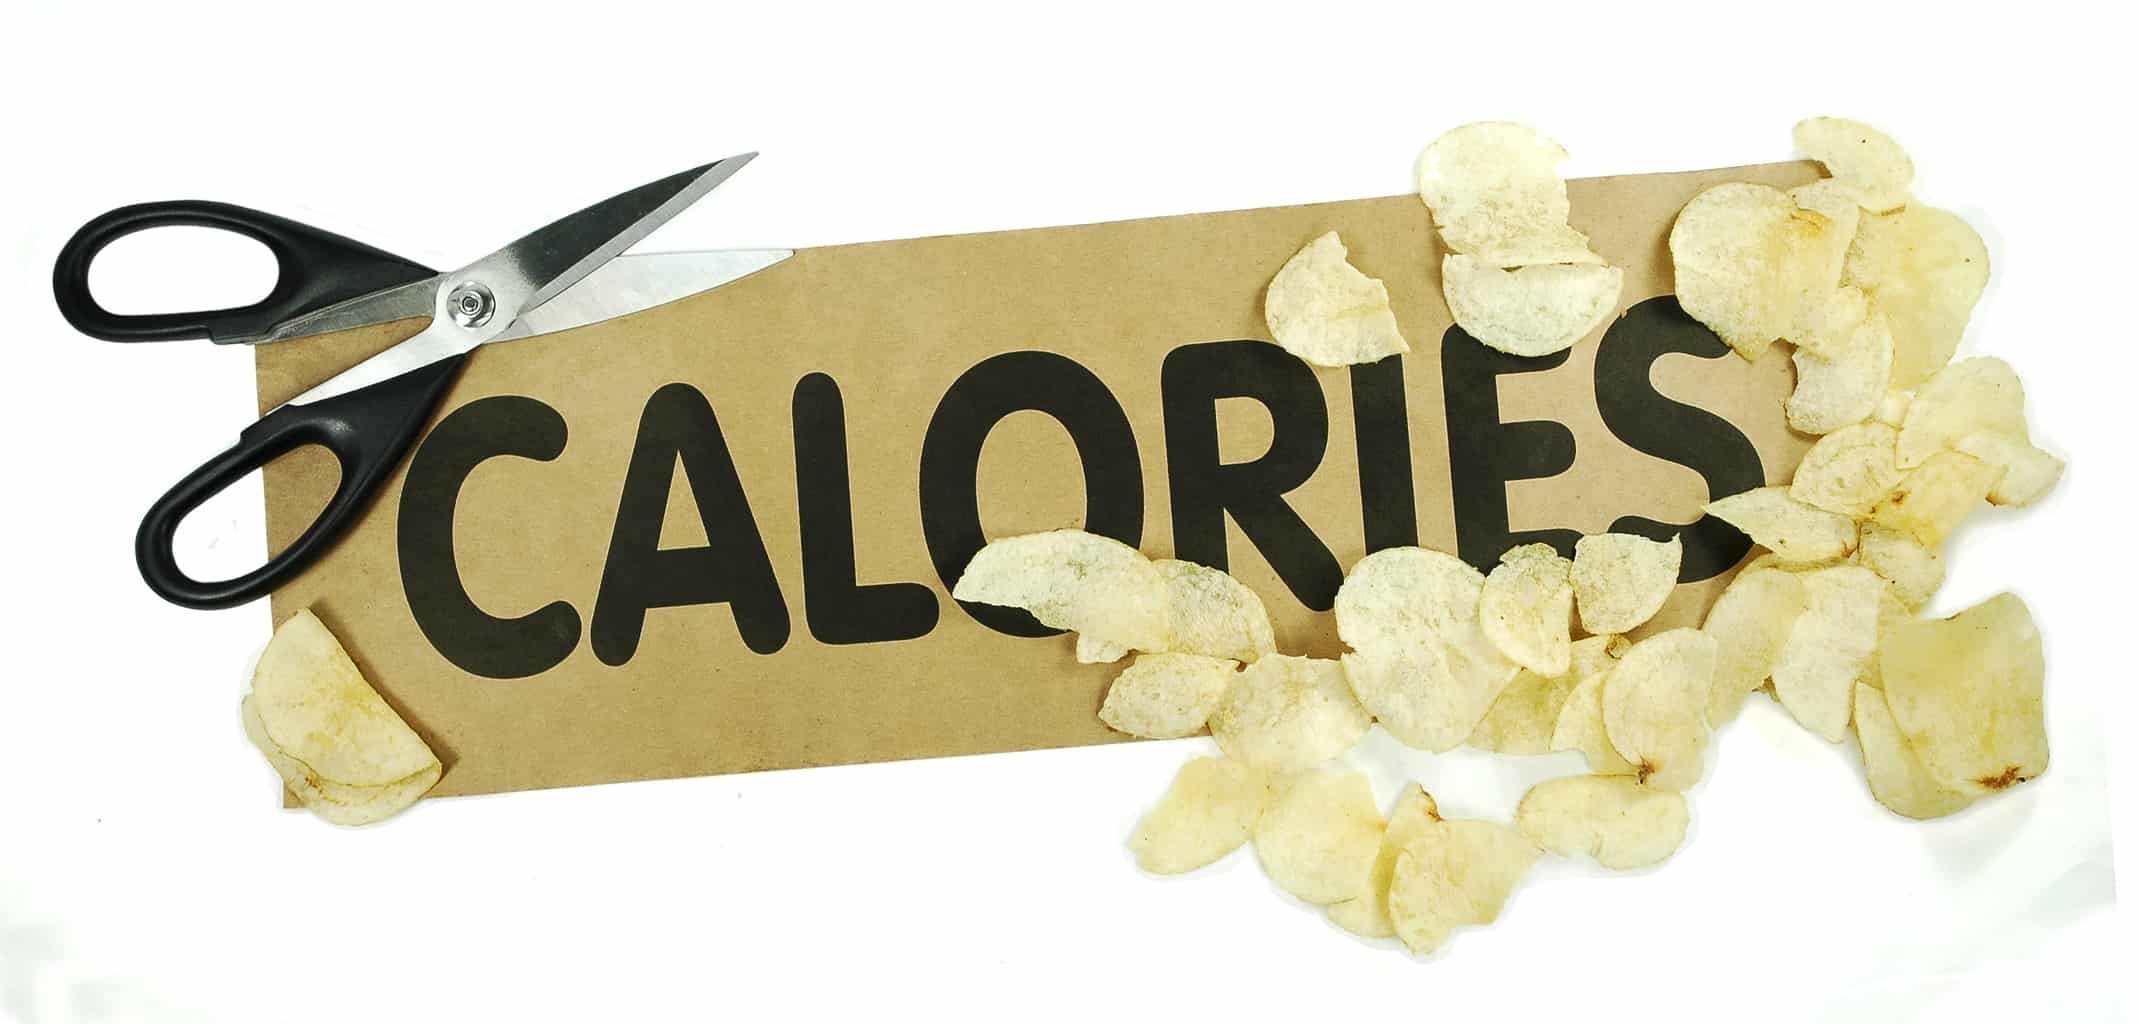 Doing this is better than cutting calories